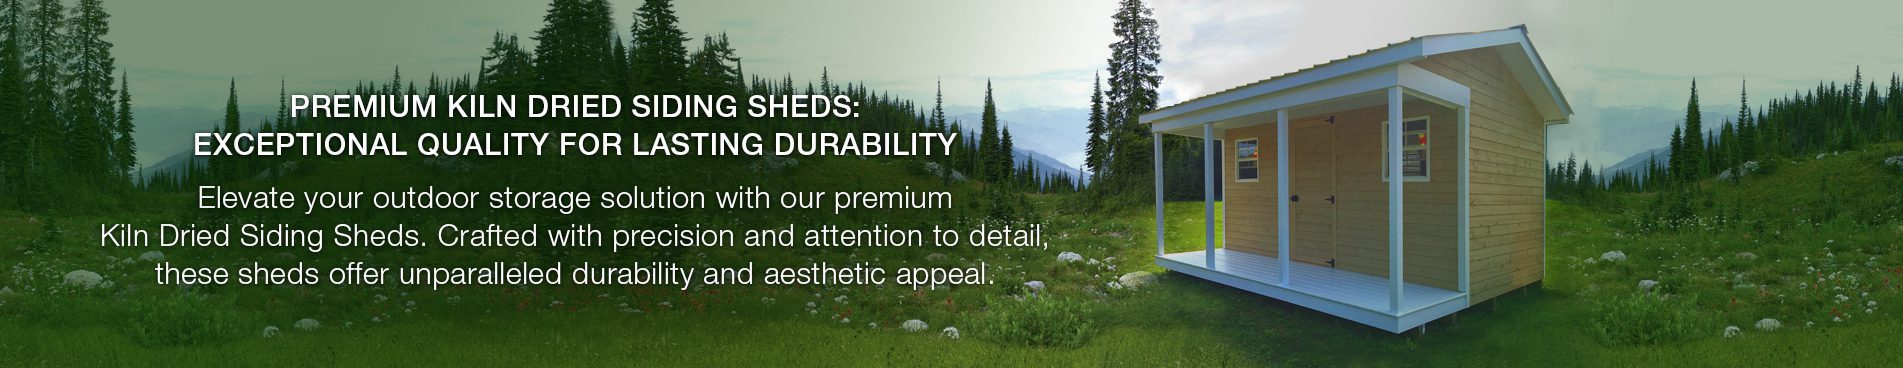 PREMIUM KILN DRIED SIDING SHEDS: EXCEPTIONAL QUALITY FOR LASTING DURABILITY